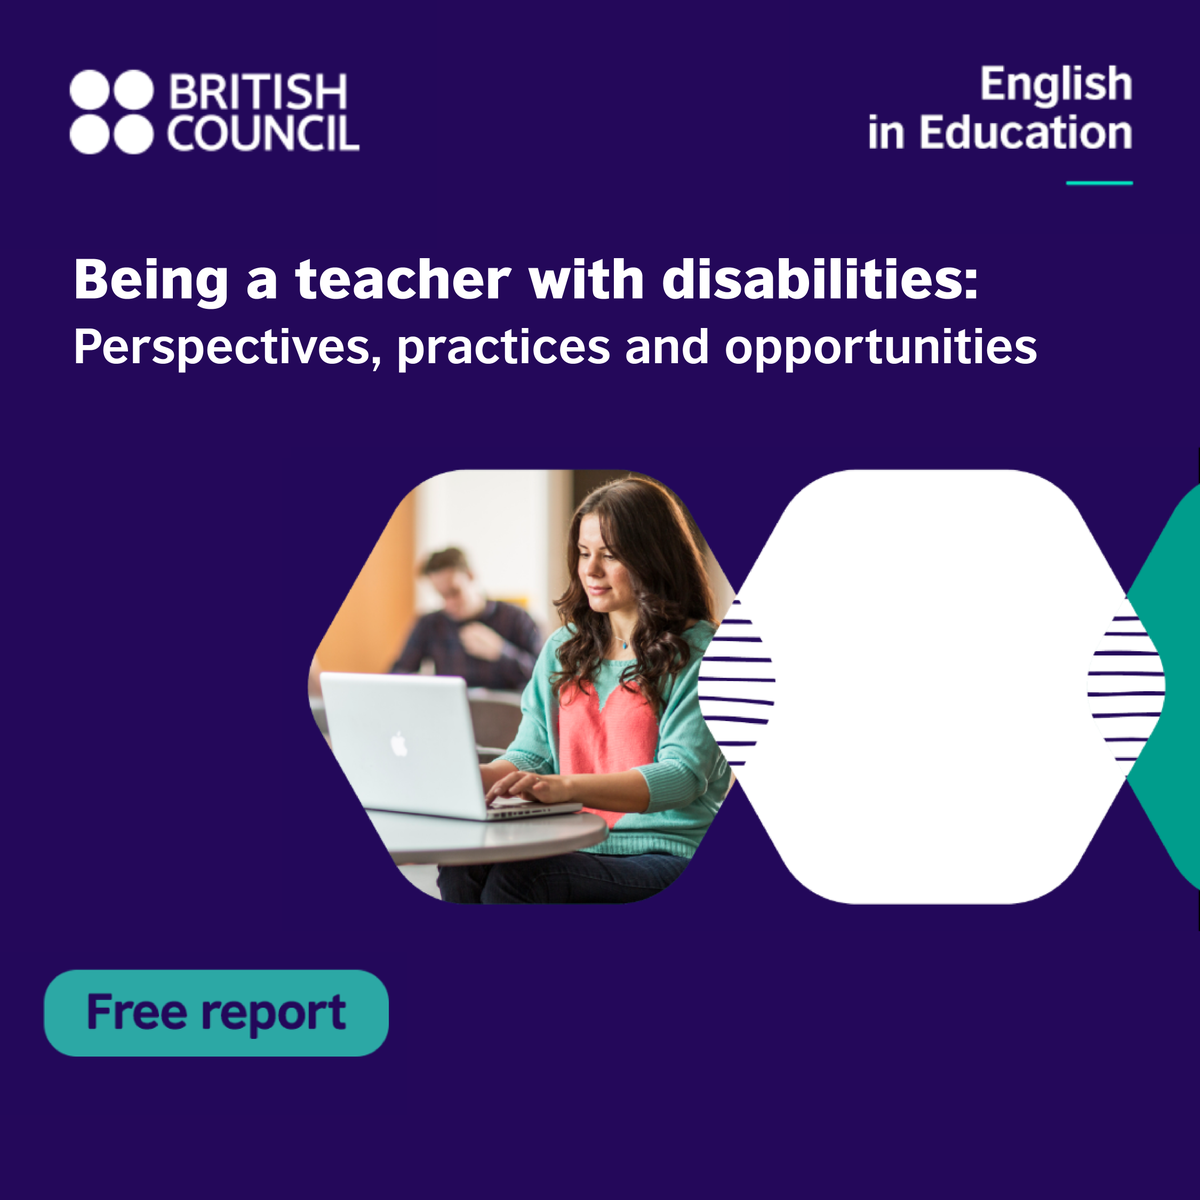 Explore our study 'Being a teacher with disabilities: perspectives, practices, and opportunities' for insights into equal opportunities for #TeachersWithDisabilities tinyurl.com/estw7 @nsingal14 @Patkpk @ThilankaW21 @CaNDER_Research @CamEdFac #GAAD #TeachingEnglish